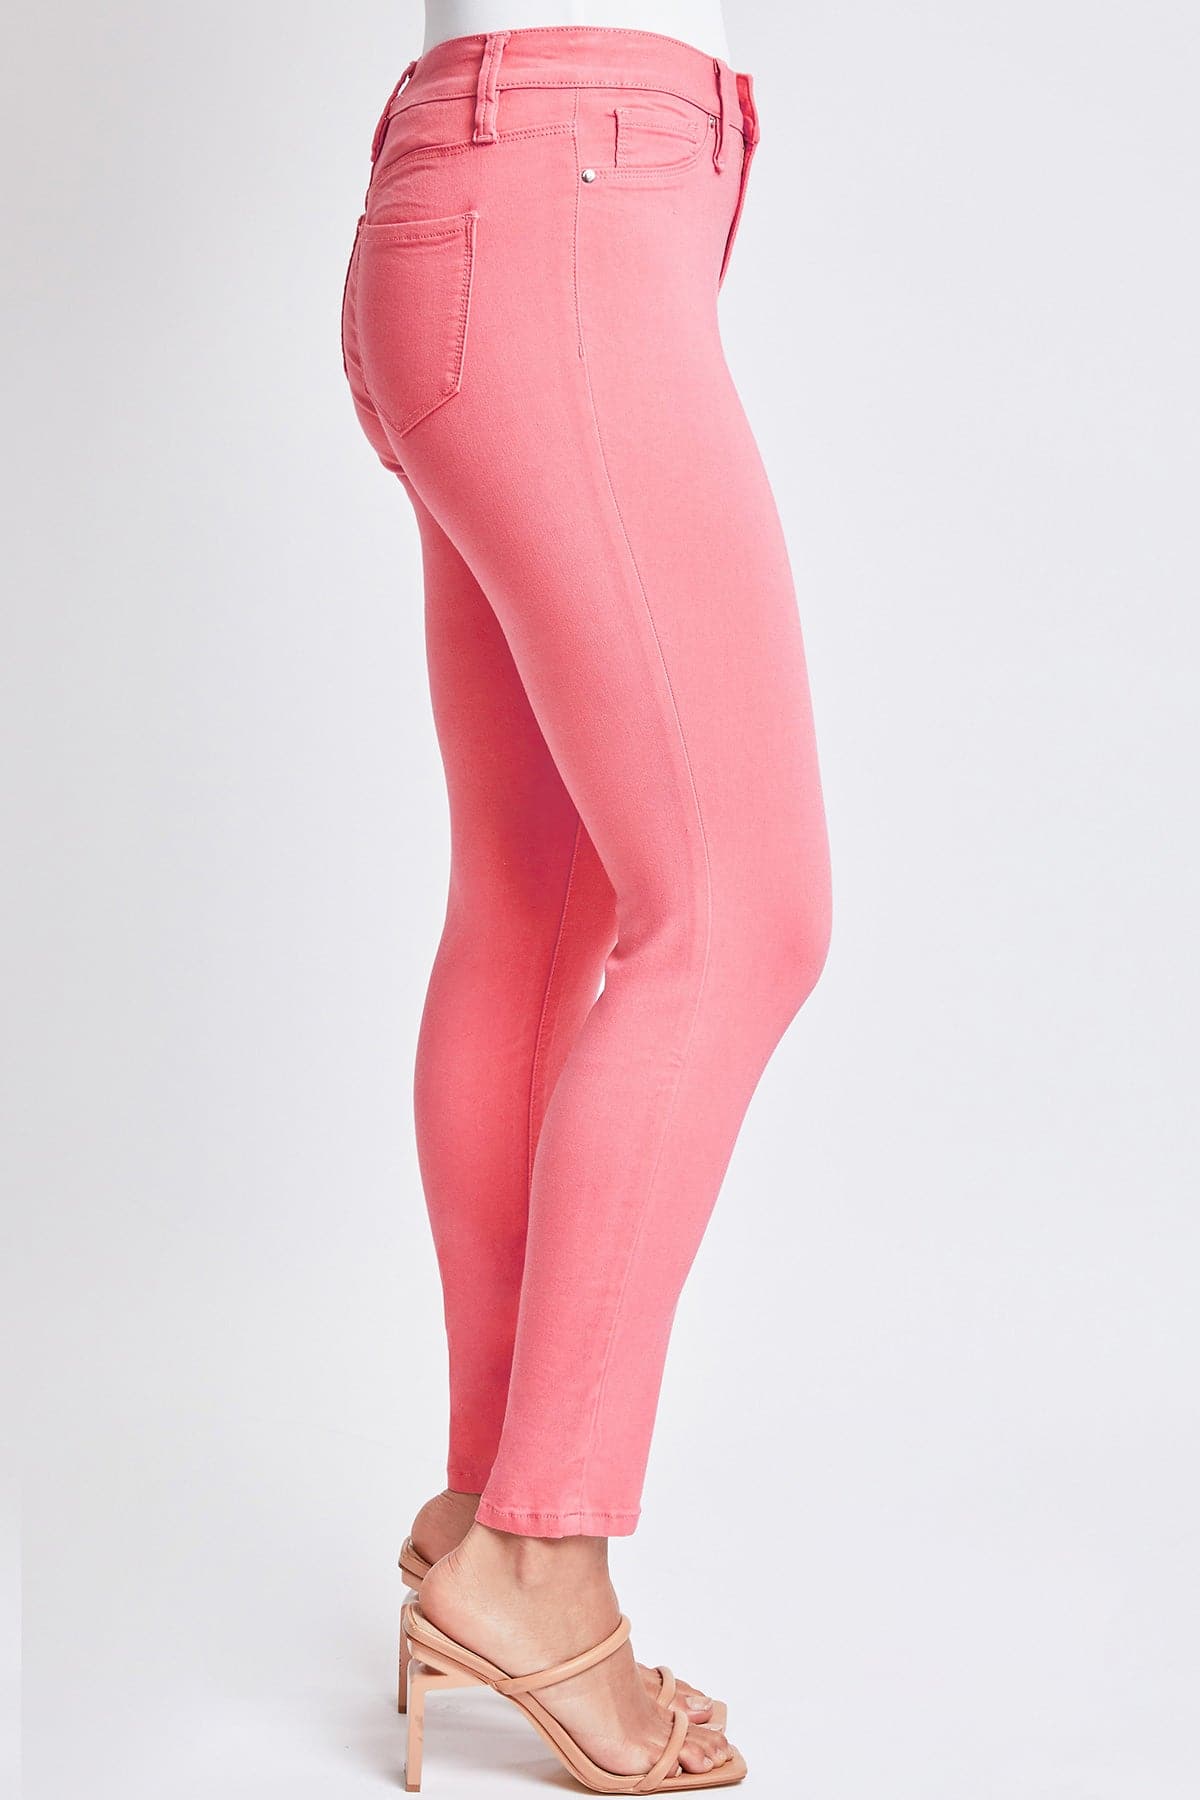 Women's Hyperstretch Forever Color Pants - Bright